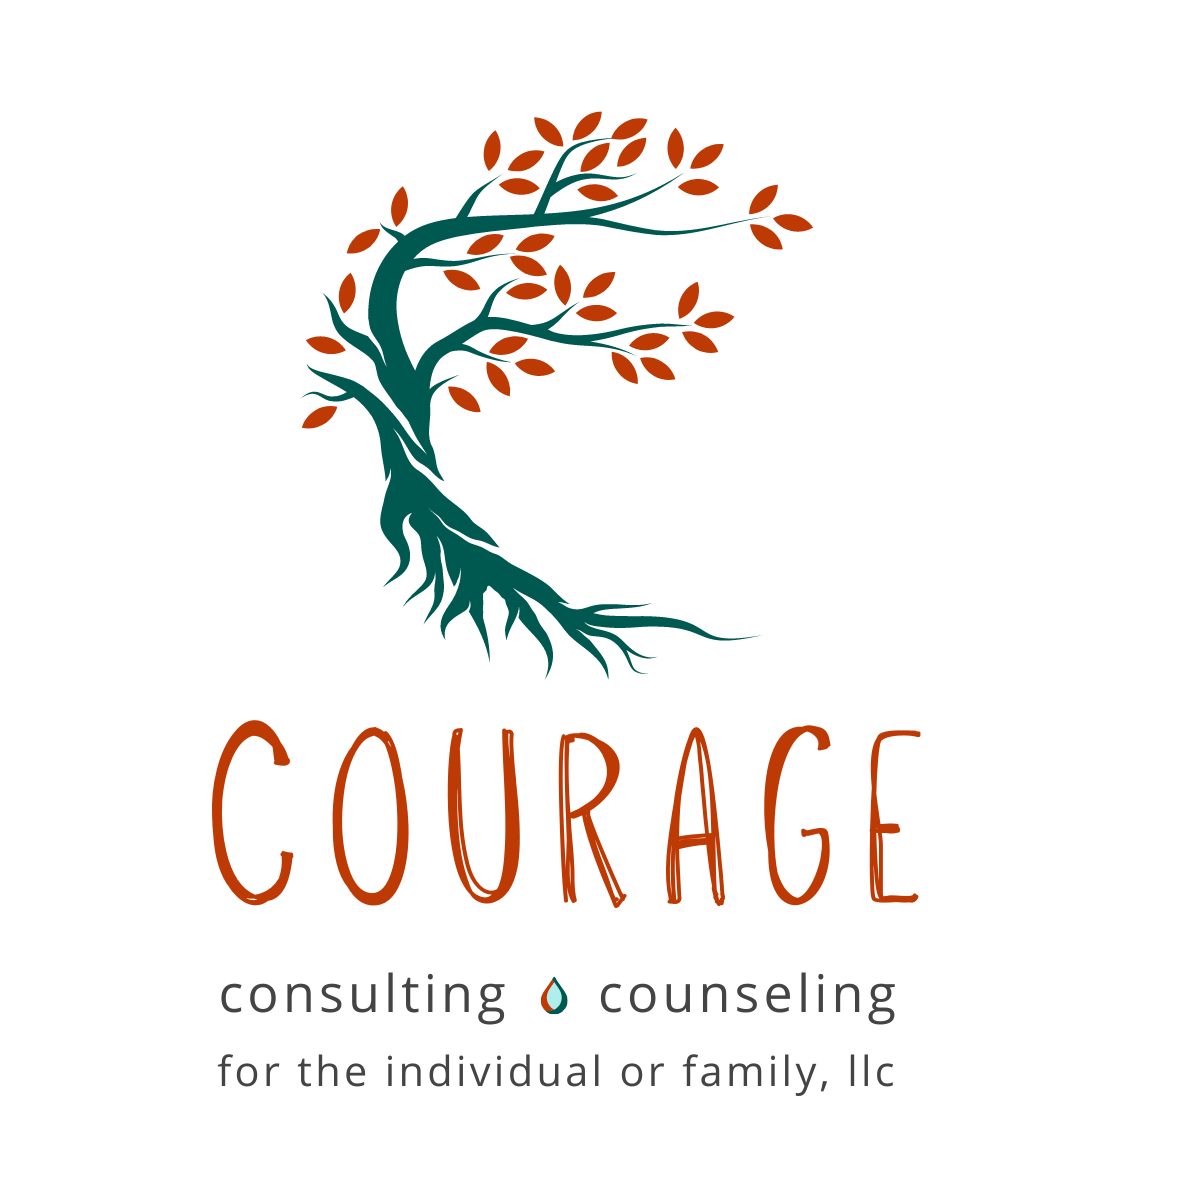 Courage Consulting and Counseling